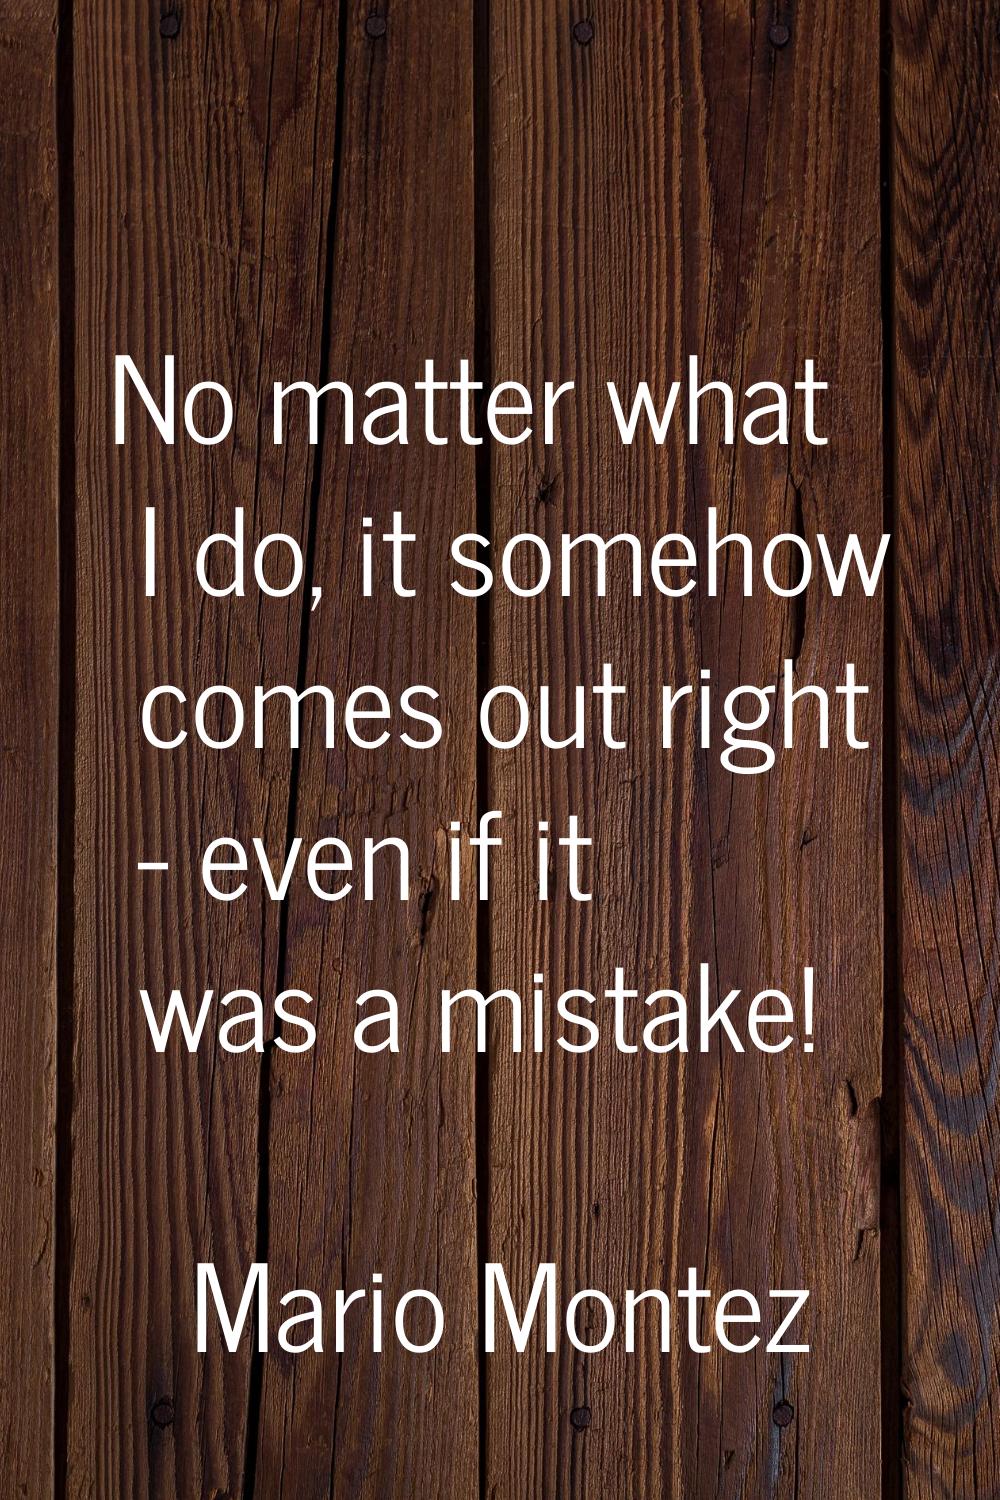 No matter what I do, it somehow comes out right - even if it was a mistake!